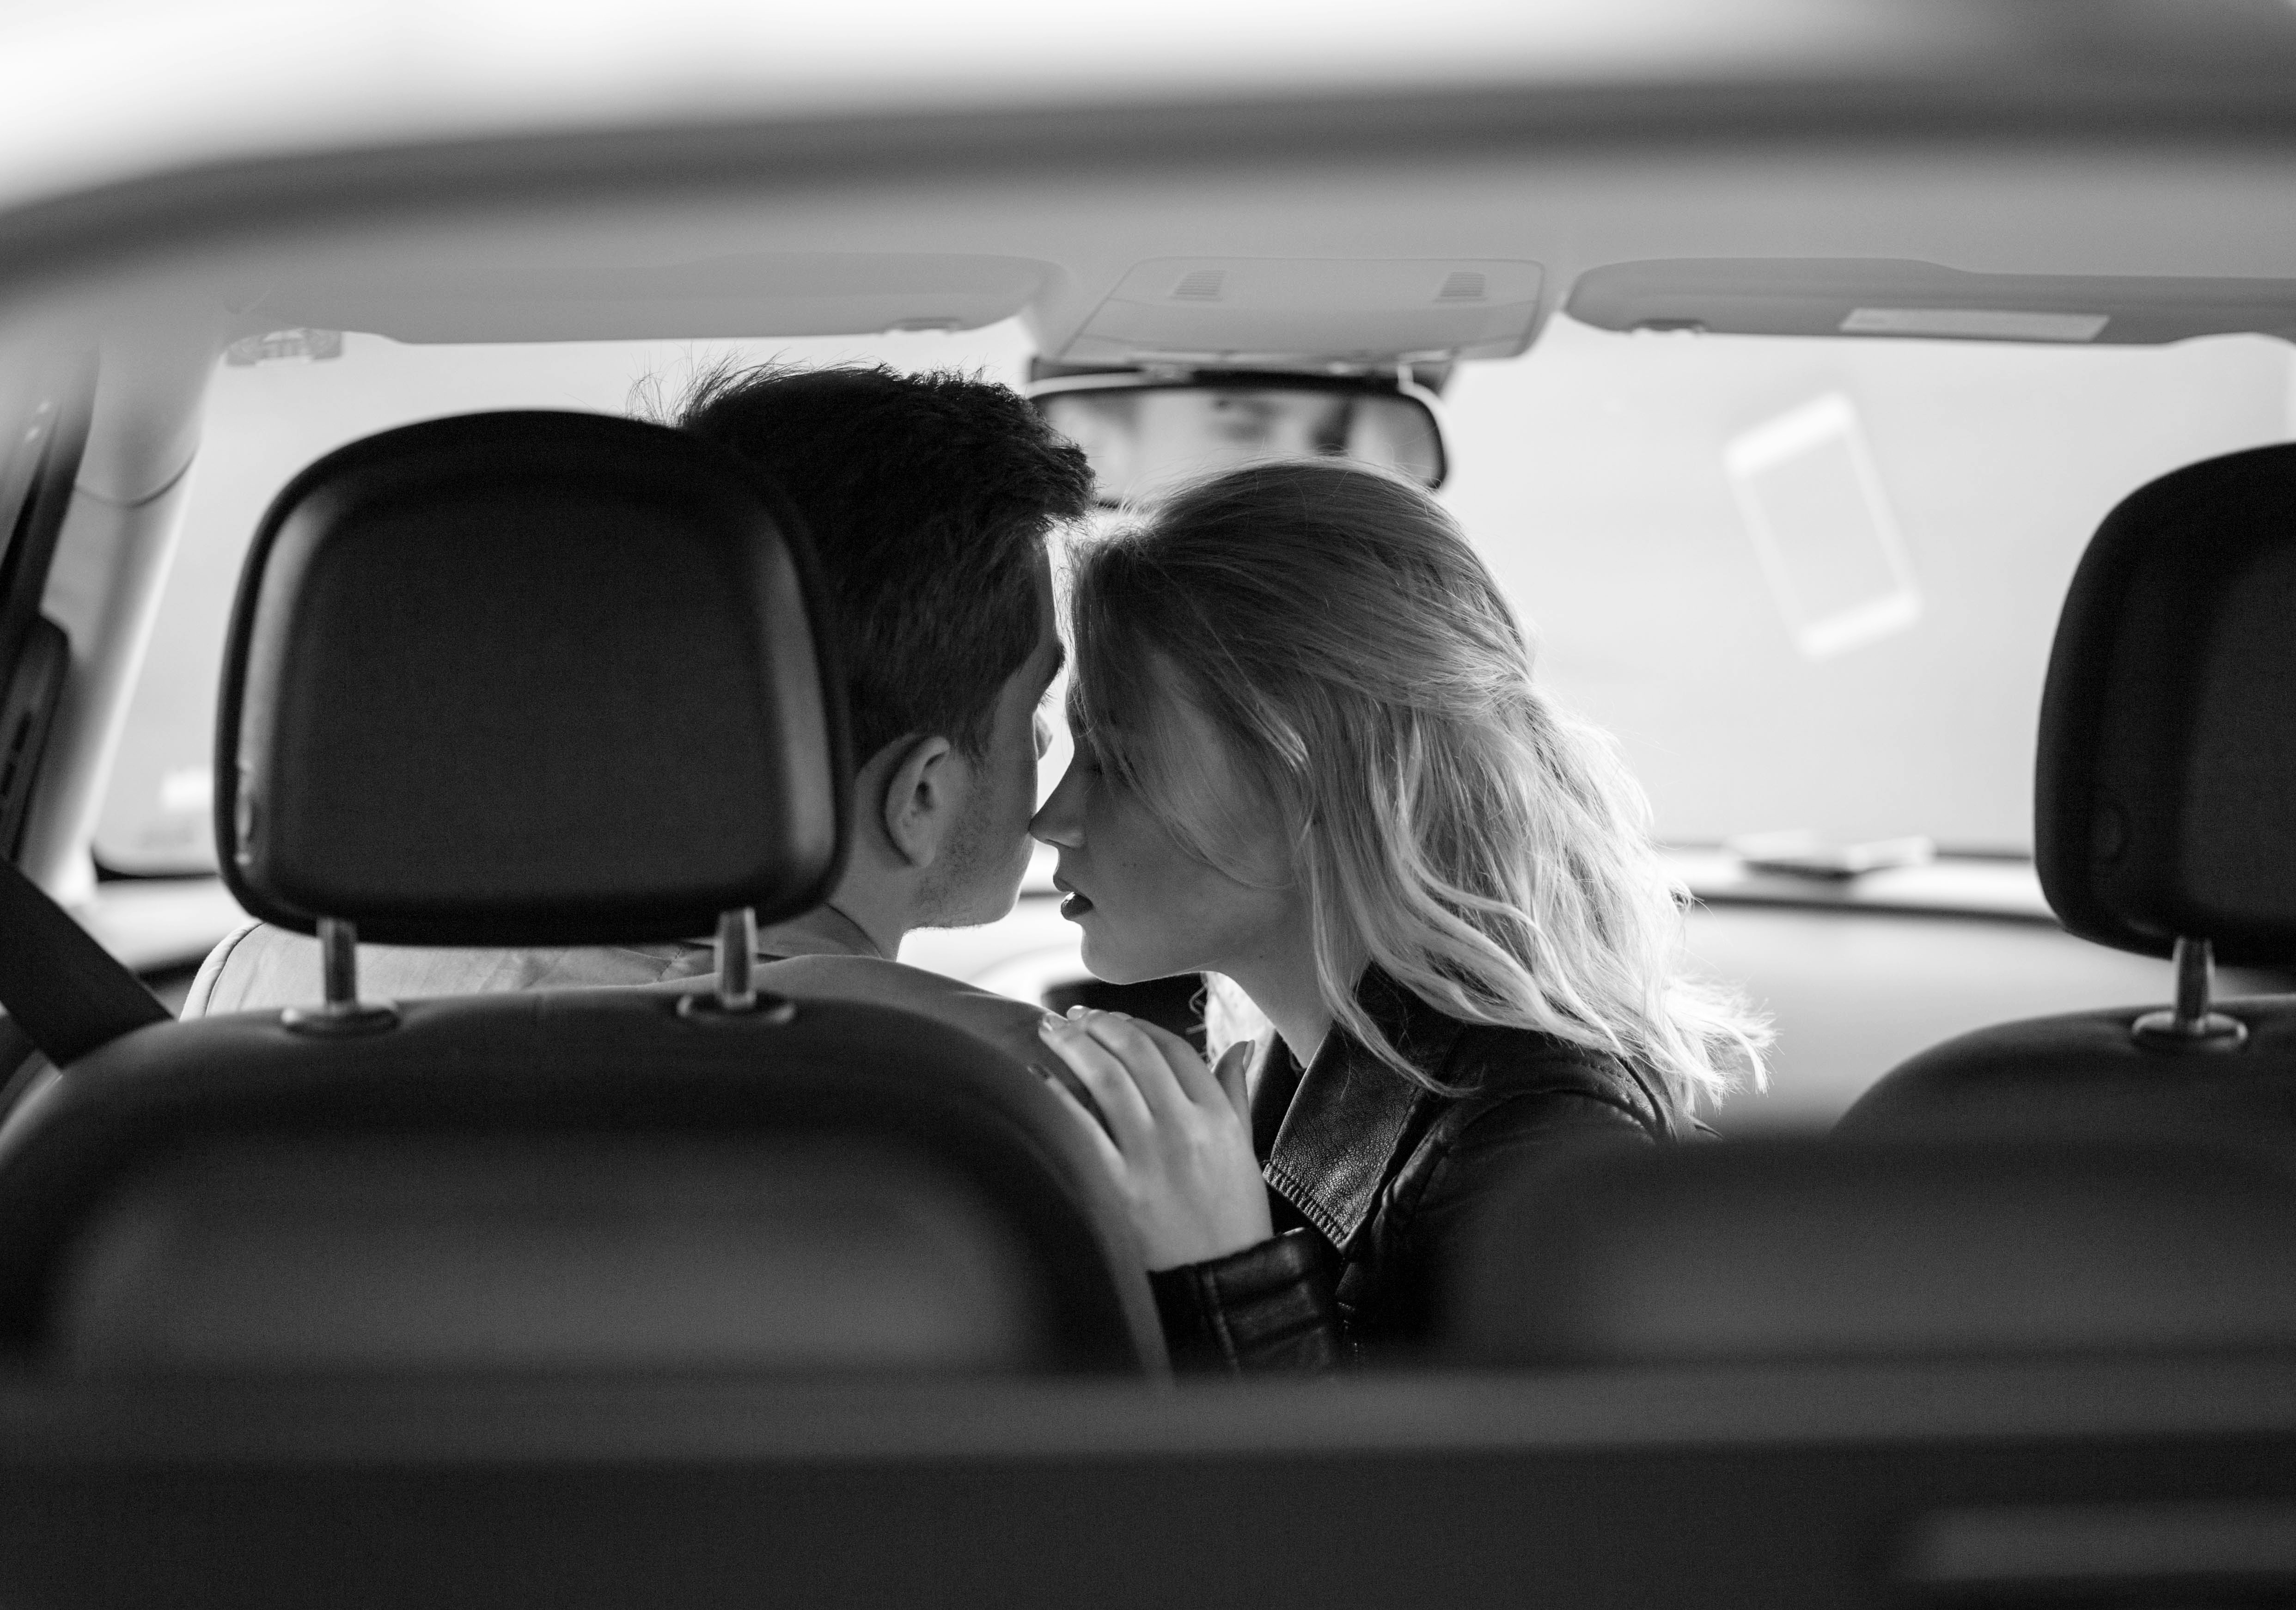 Couple romantic kissing in car. | Source: Shutterstock